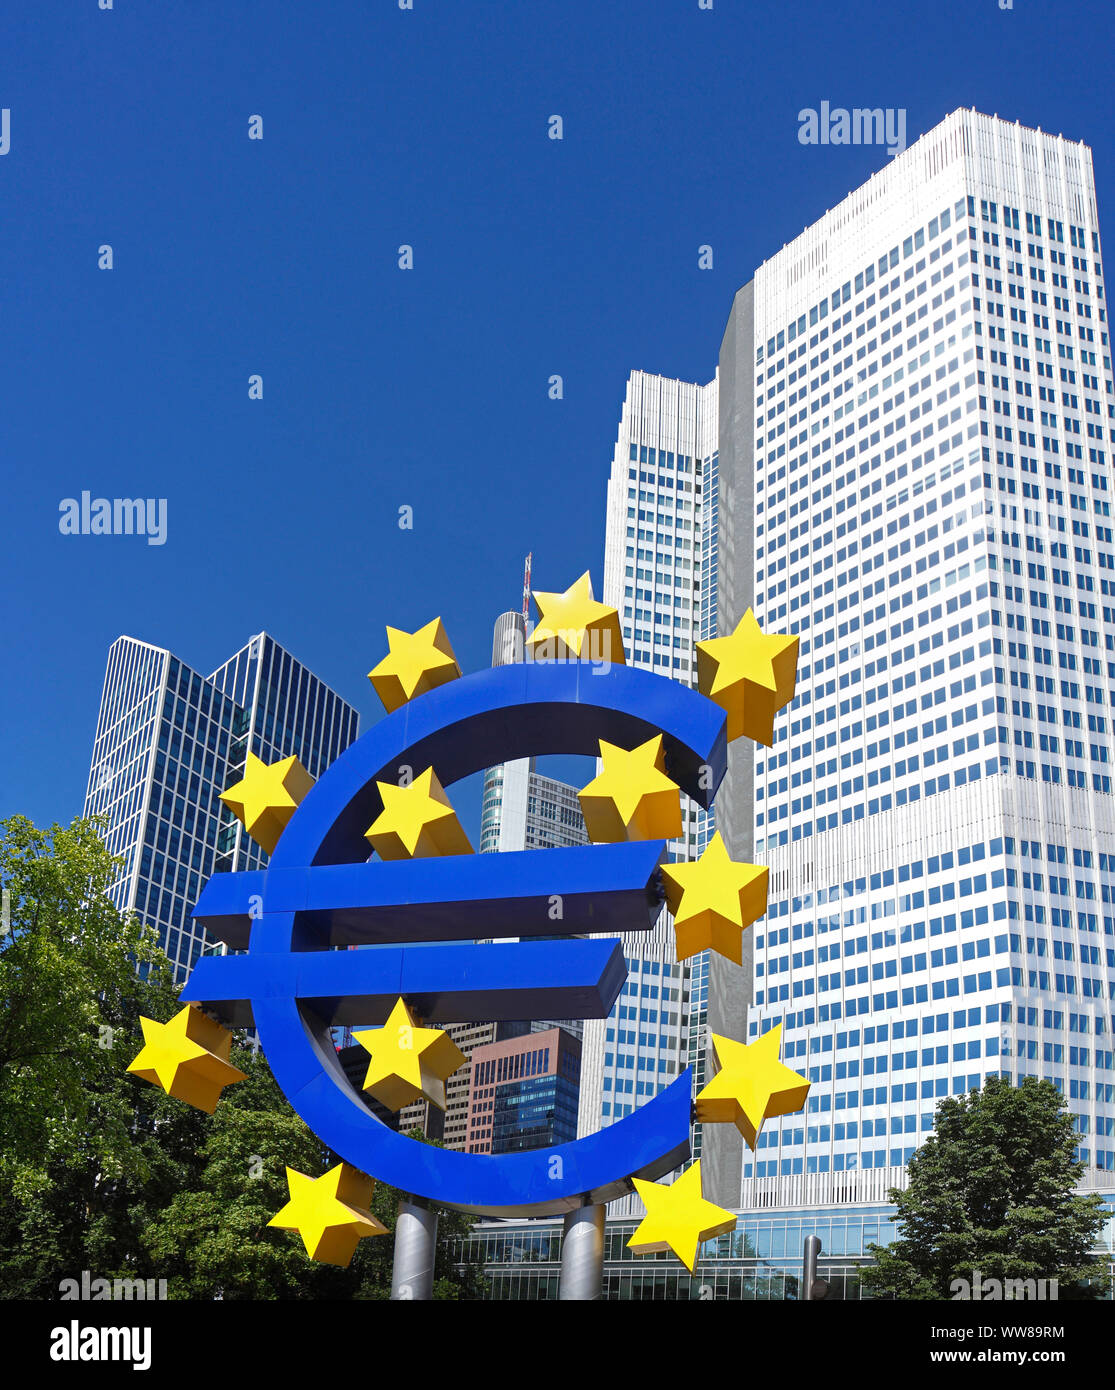 Euro symbol in front of the ECB building, European Central Bank, Eurotower, Frankfurt am Main, Hesse, Germany, Europe Stock Photo